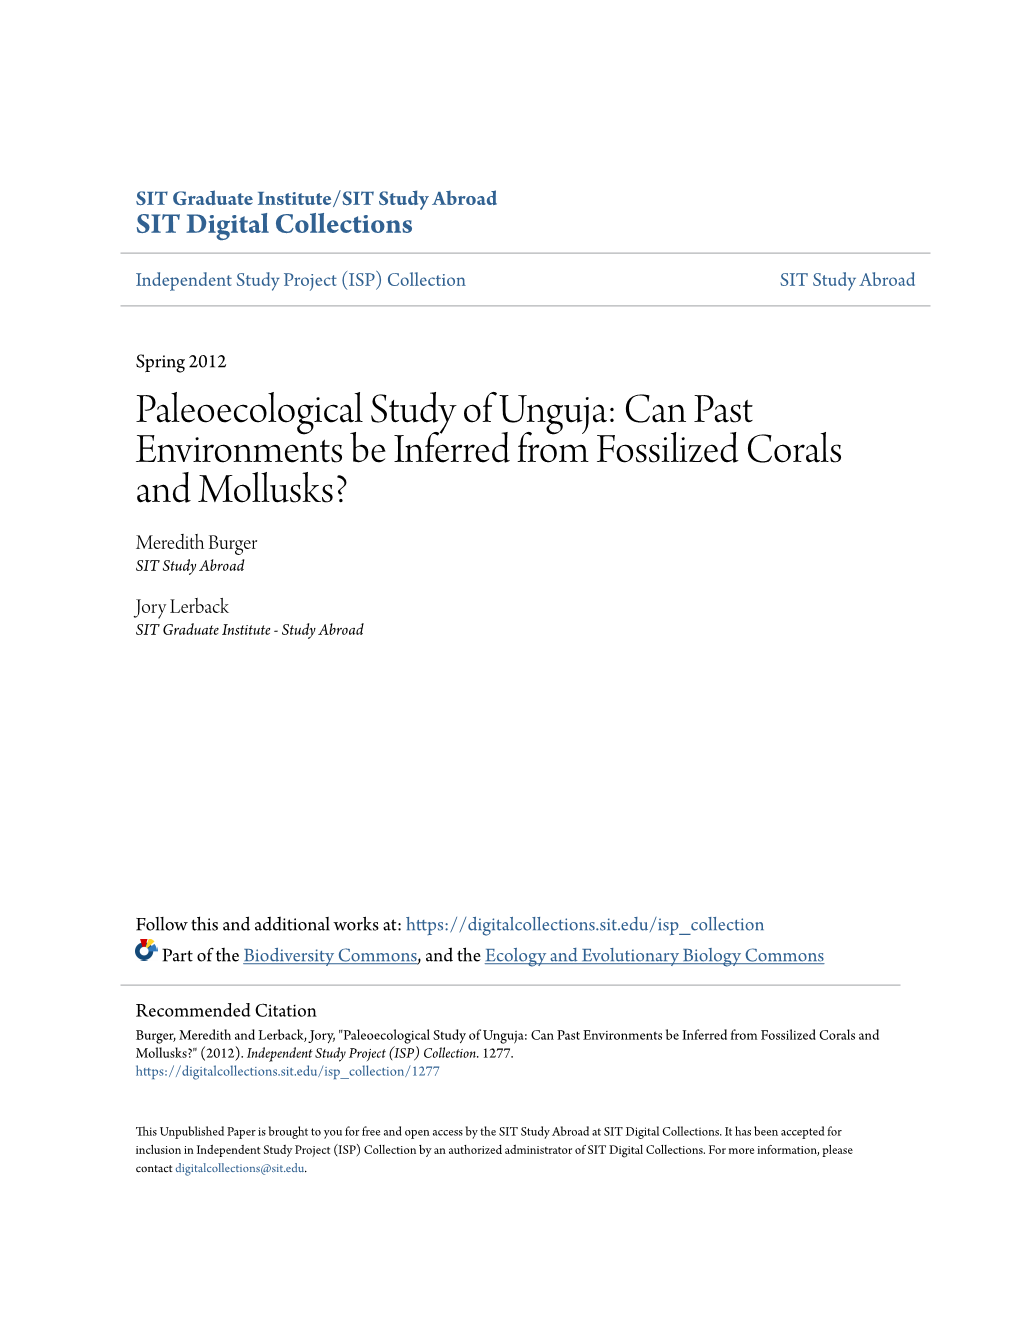 Paleoecological Study of Unguja: Can Past Environments Be Inferred from Fossilized Corals and Mollusks? Meredith Burger SIT Study Abroad